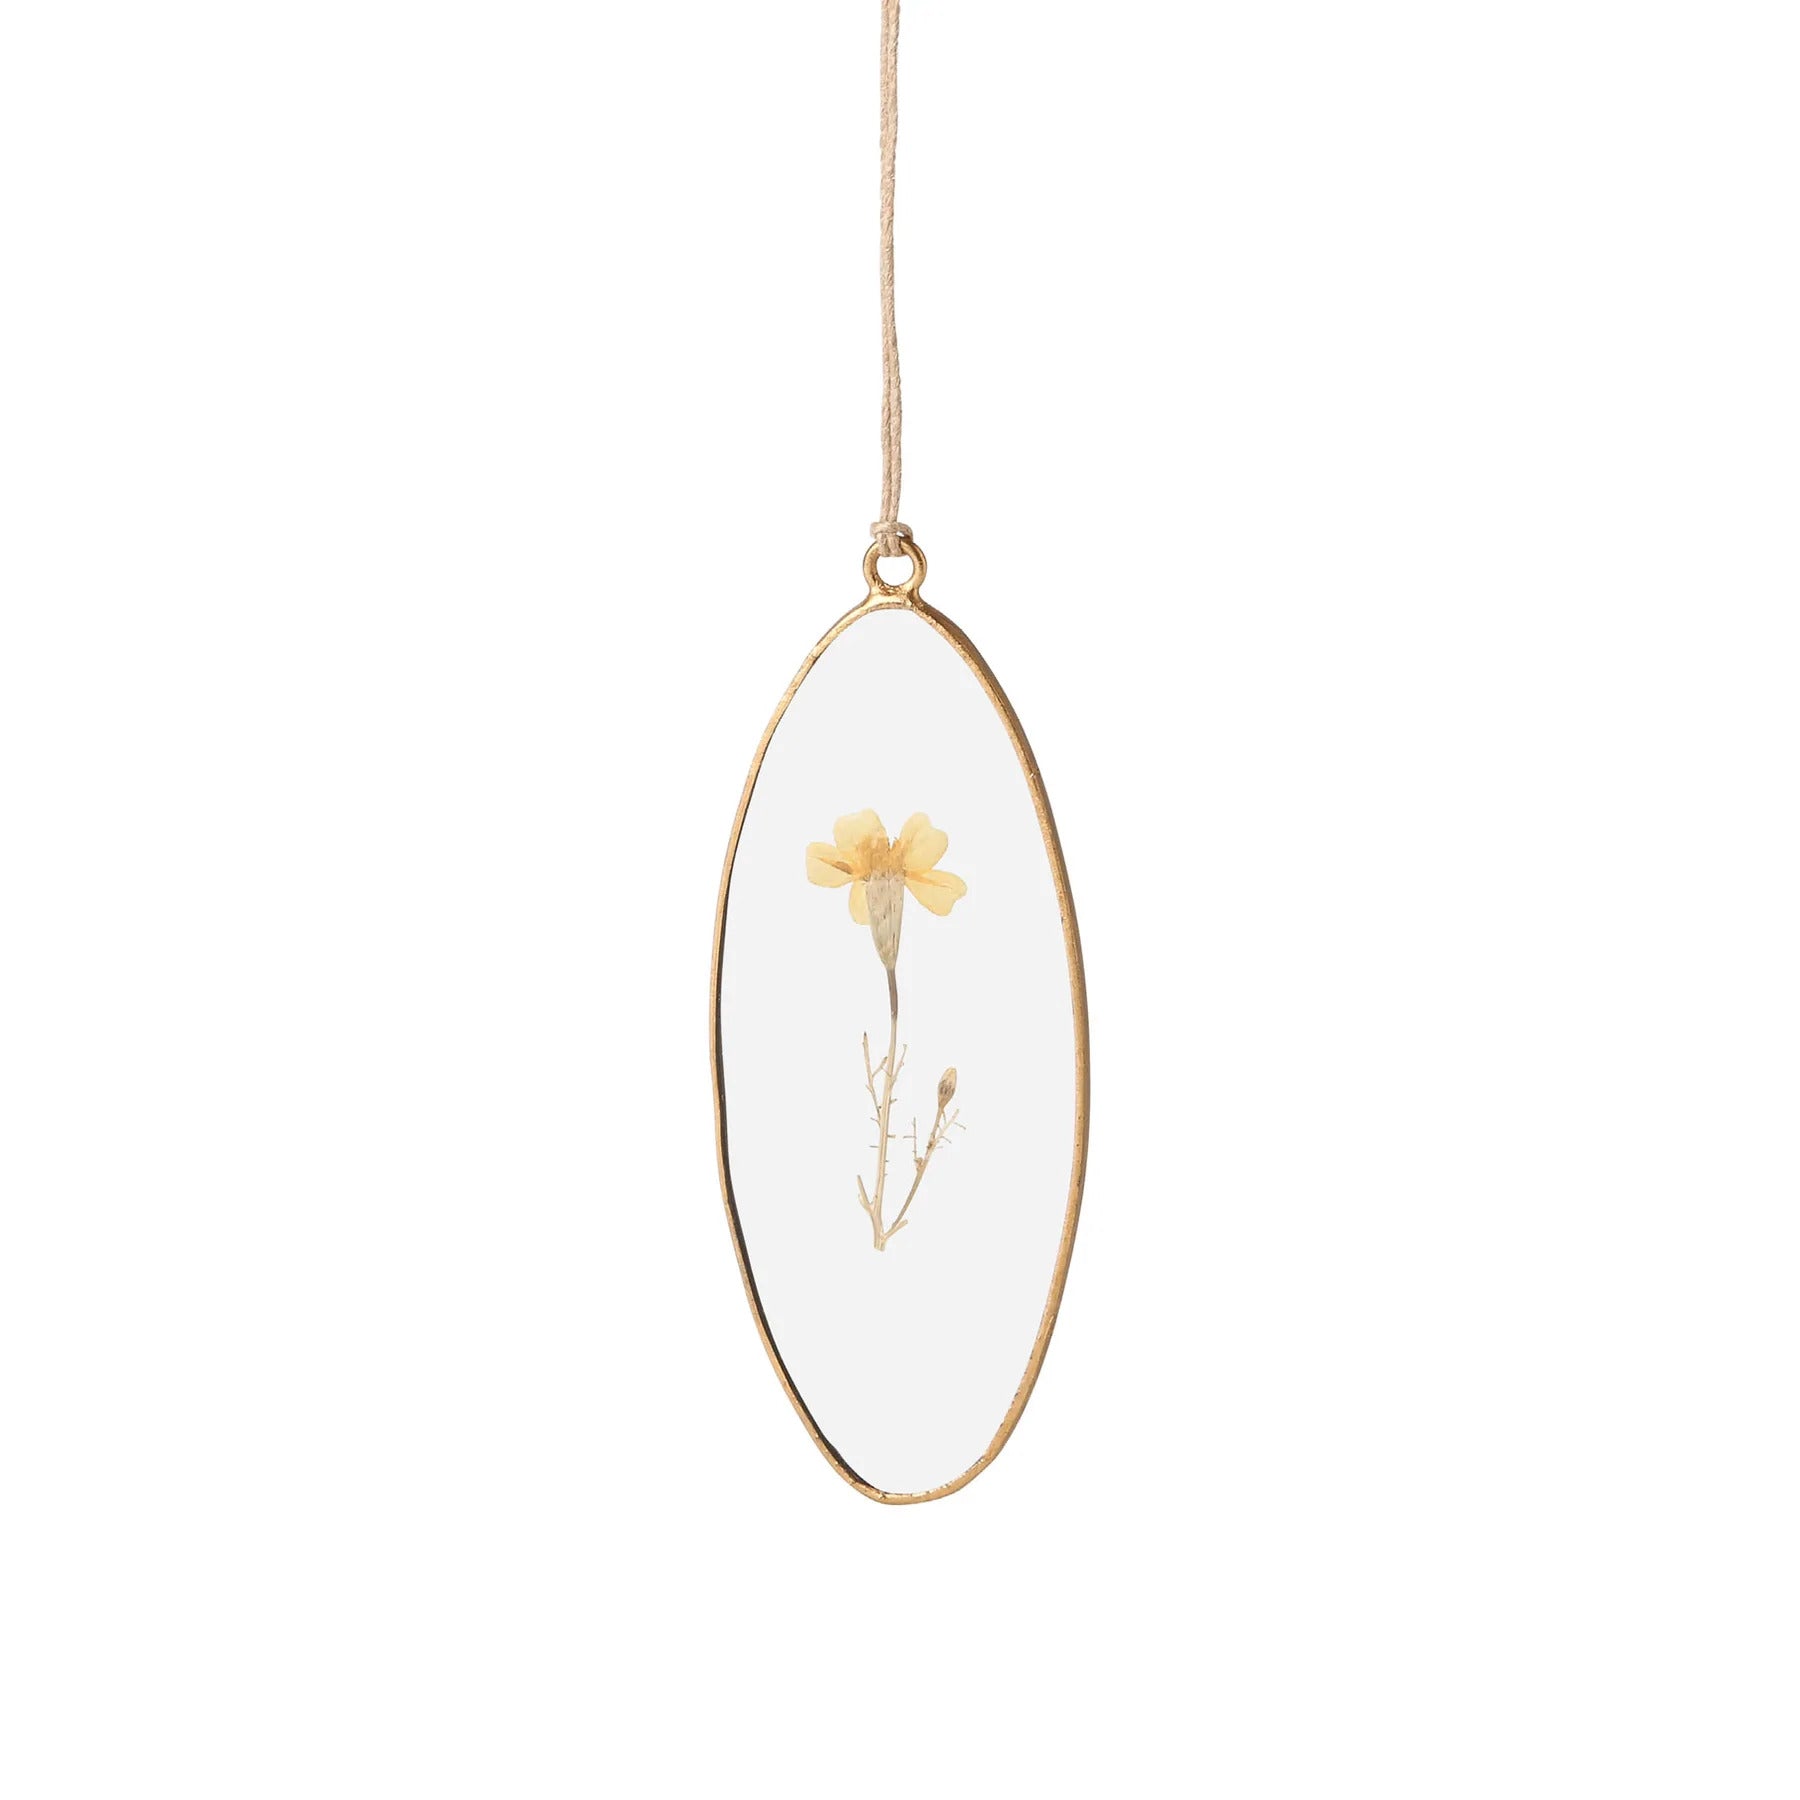 Rosy Rings Golden Oval Pressed Floral Suncatcher